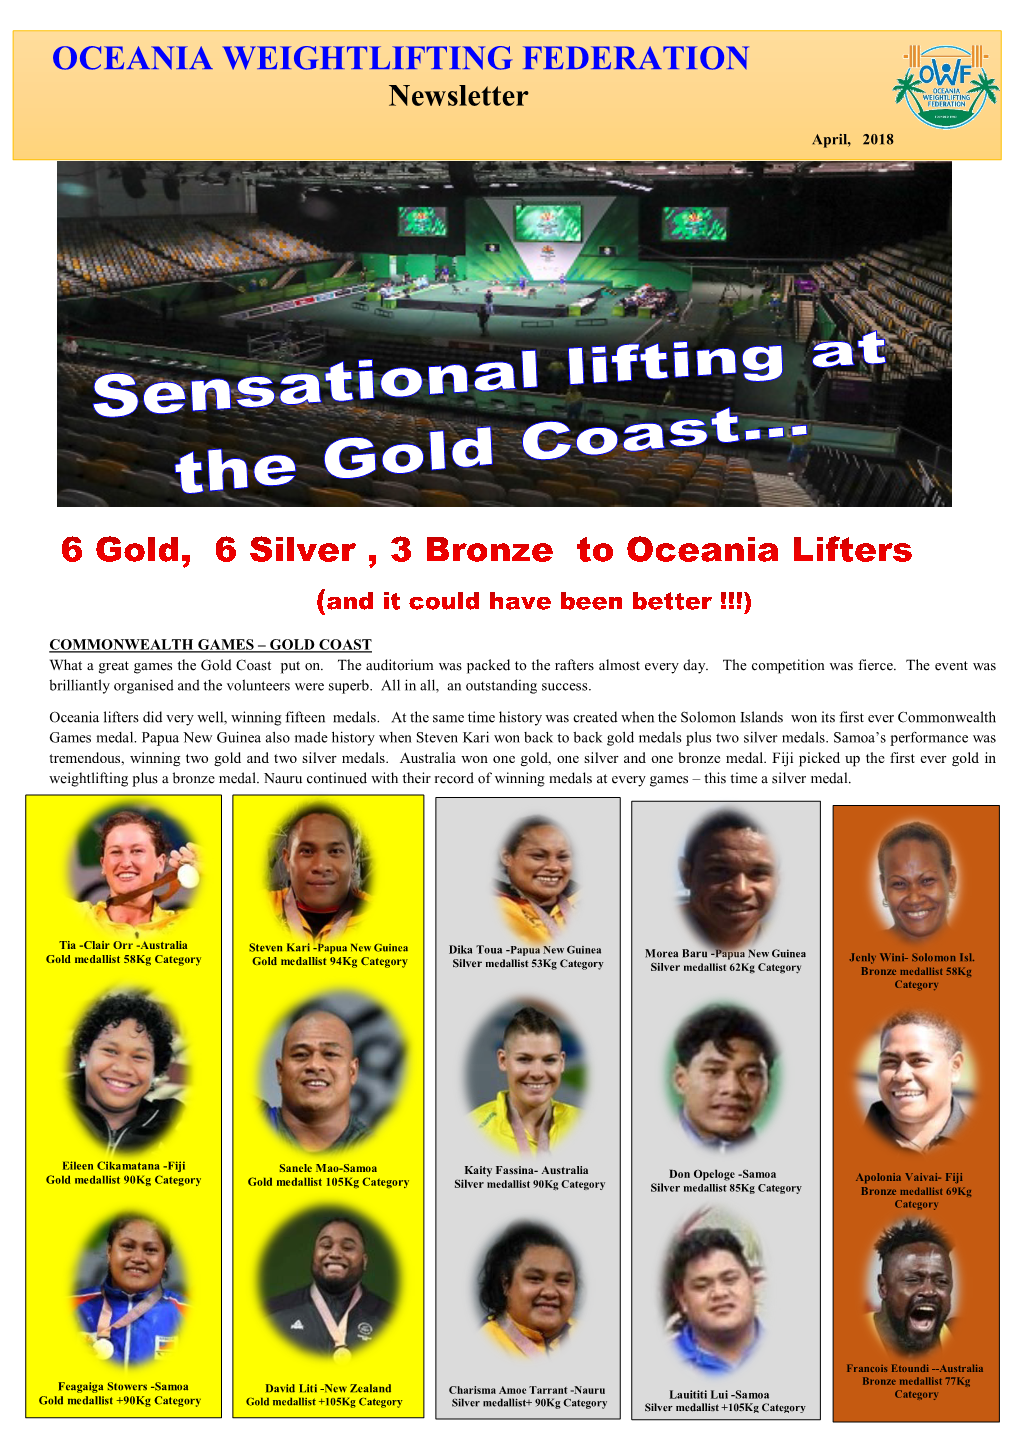 OCEANIA WEIGHTLIFTING FEDERATION Newsletter